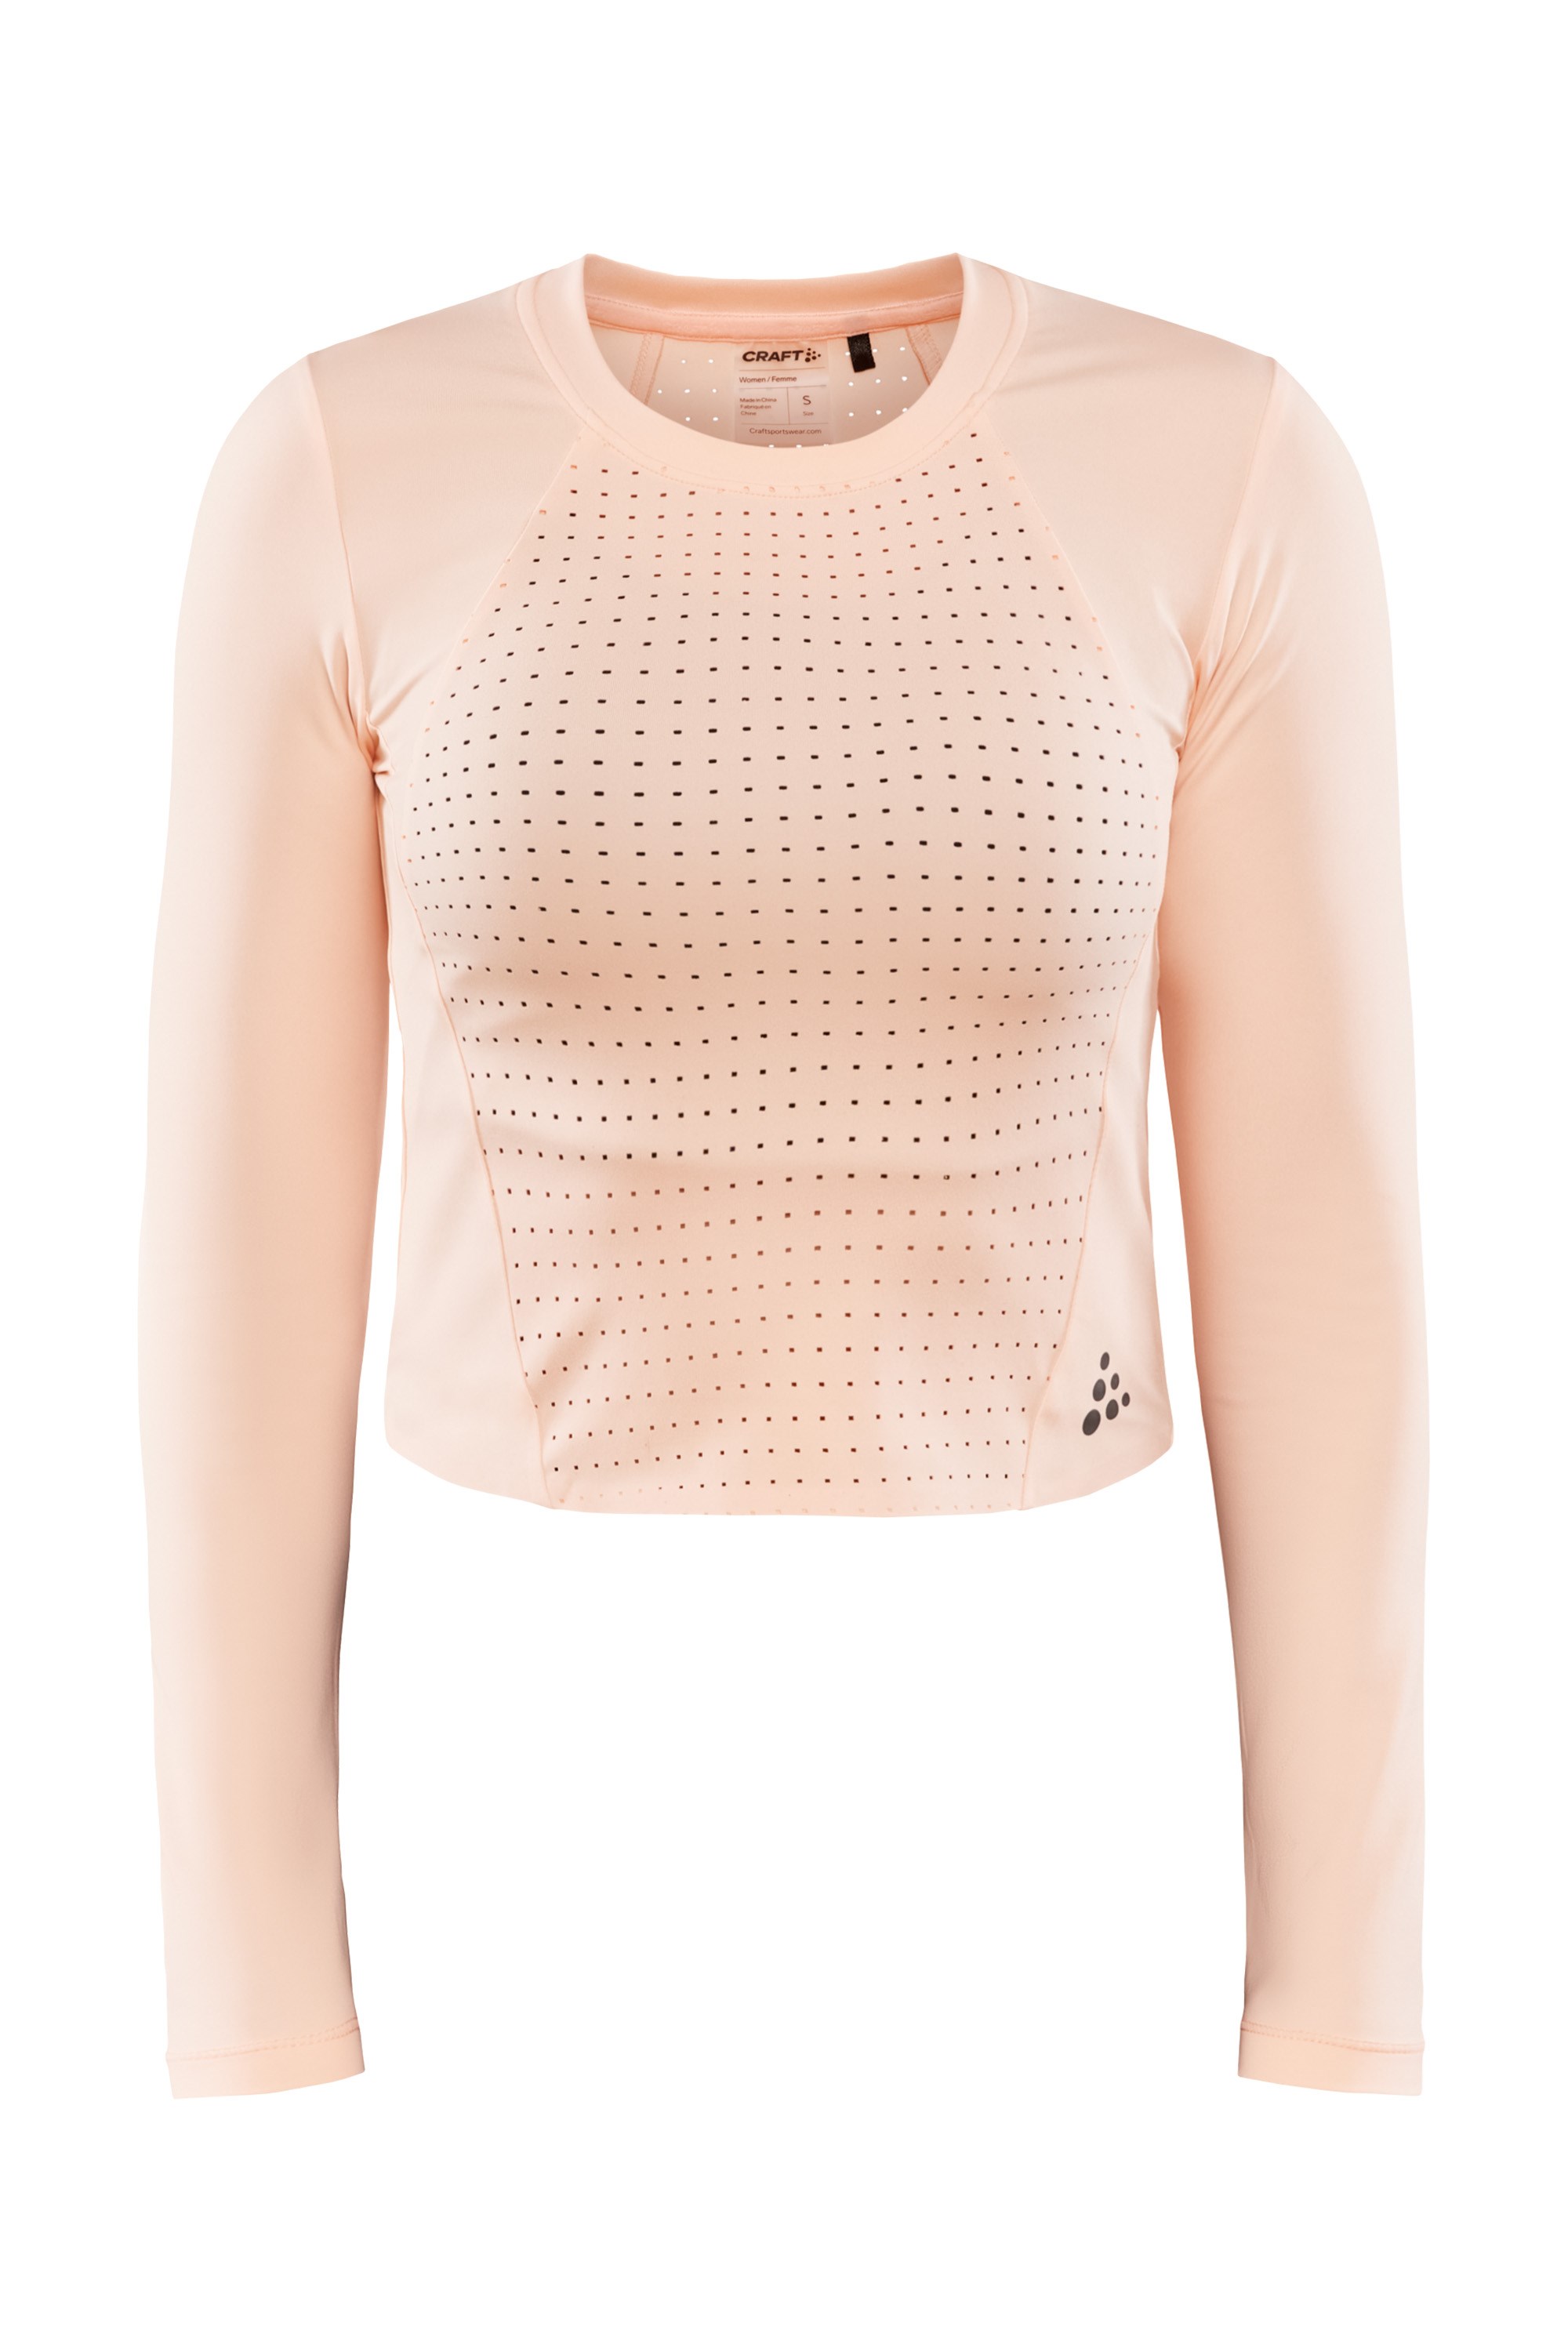 ADV HiT Womens Cropped Top -